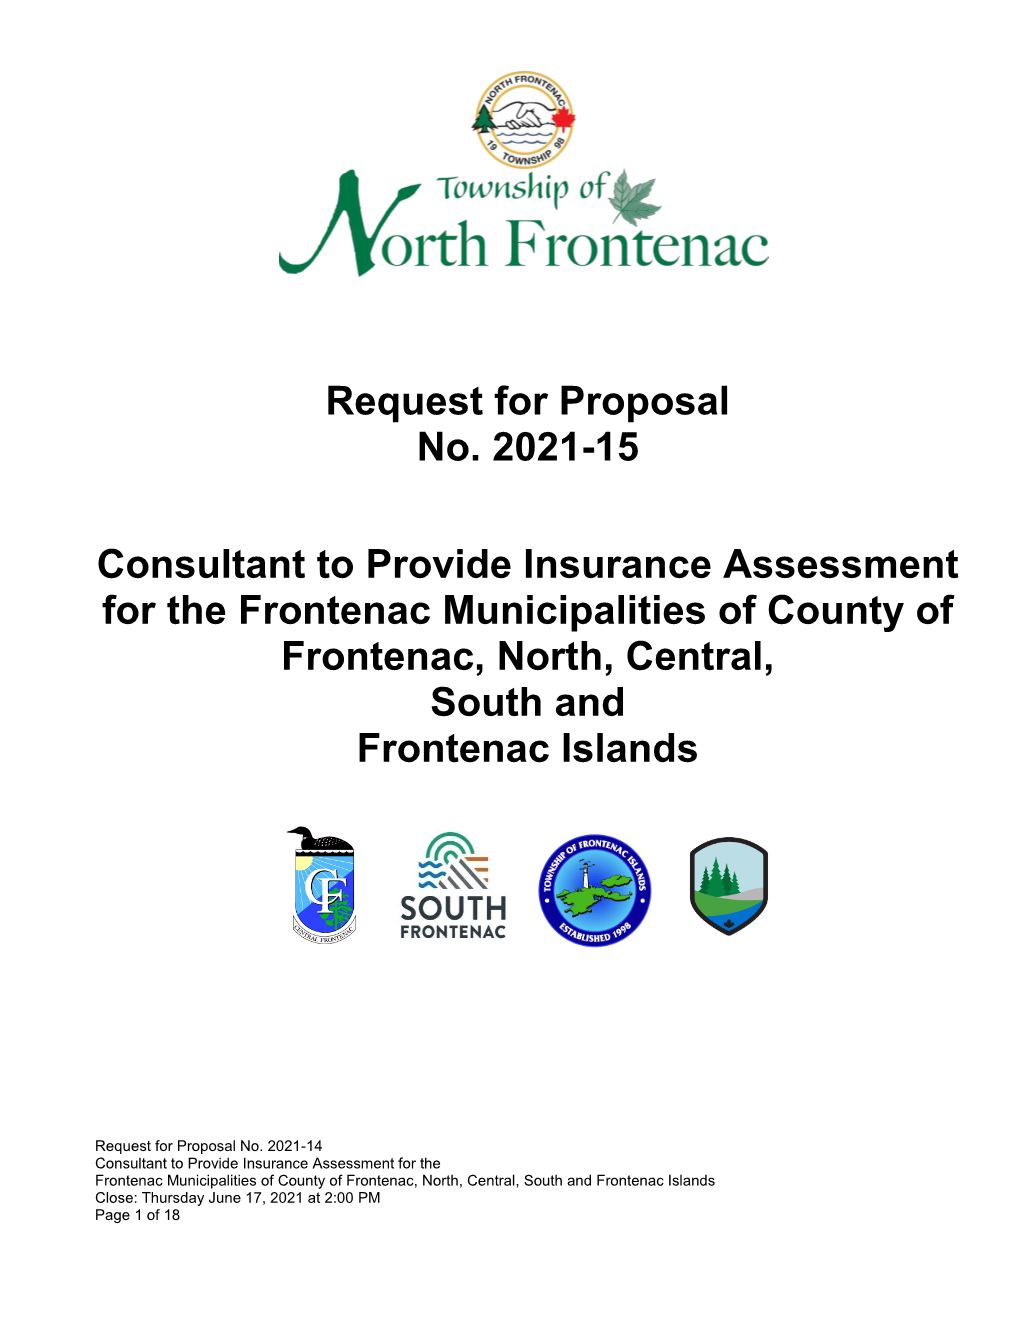 Request for Proposal No. 2021-15 Consultant To